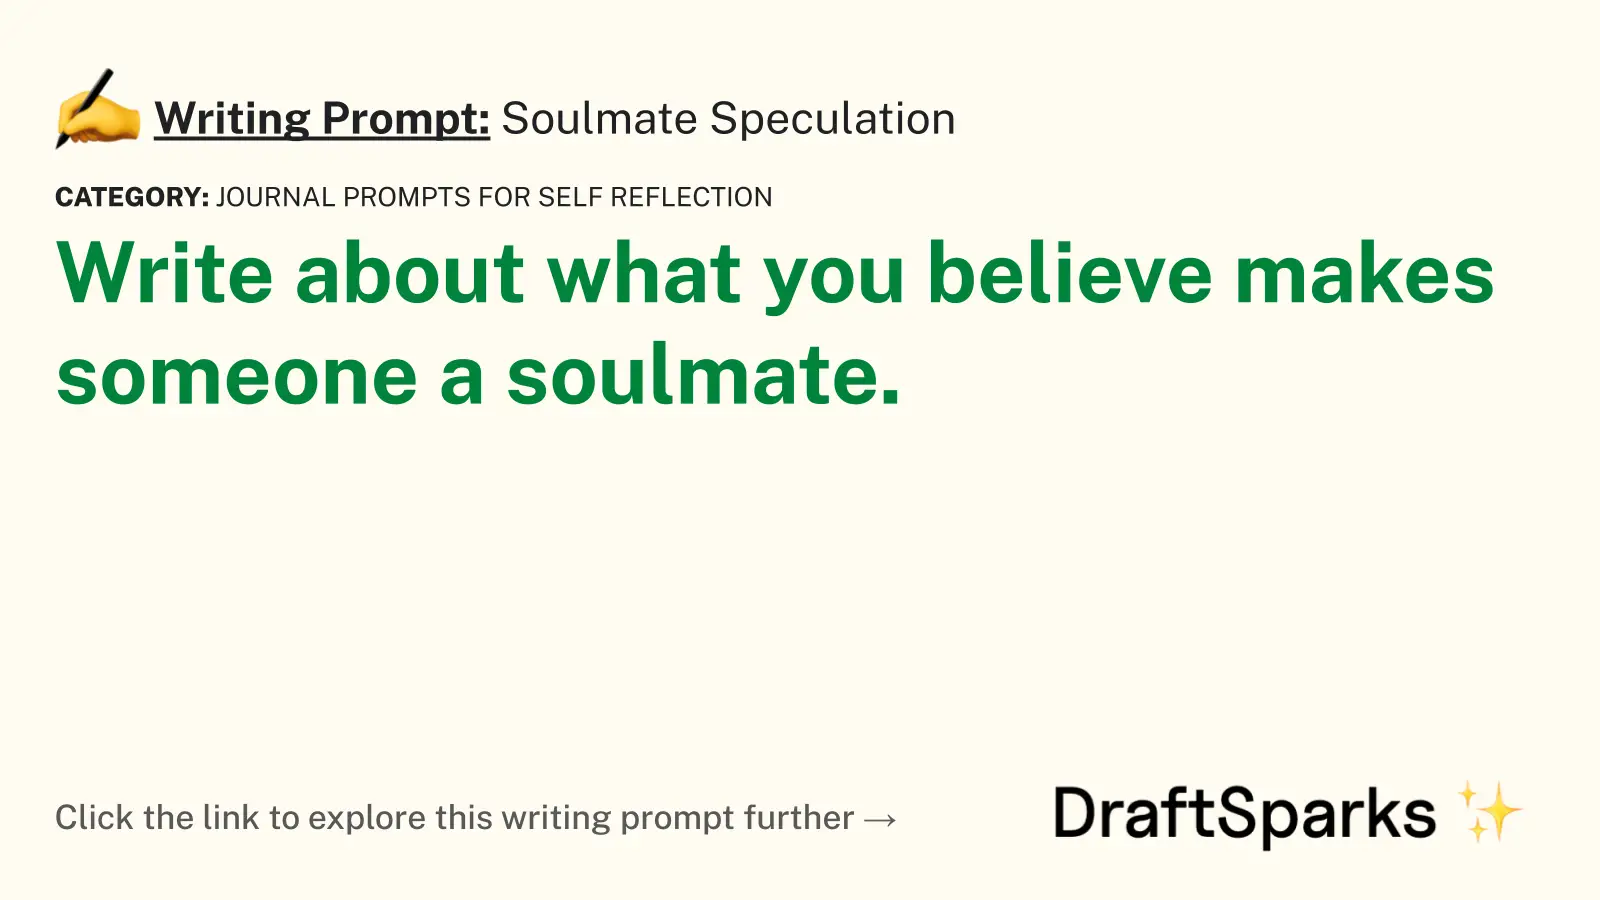 Soulmate Speculation